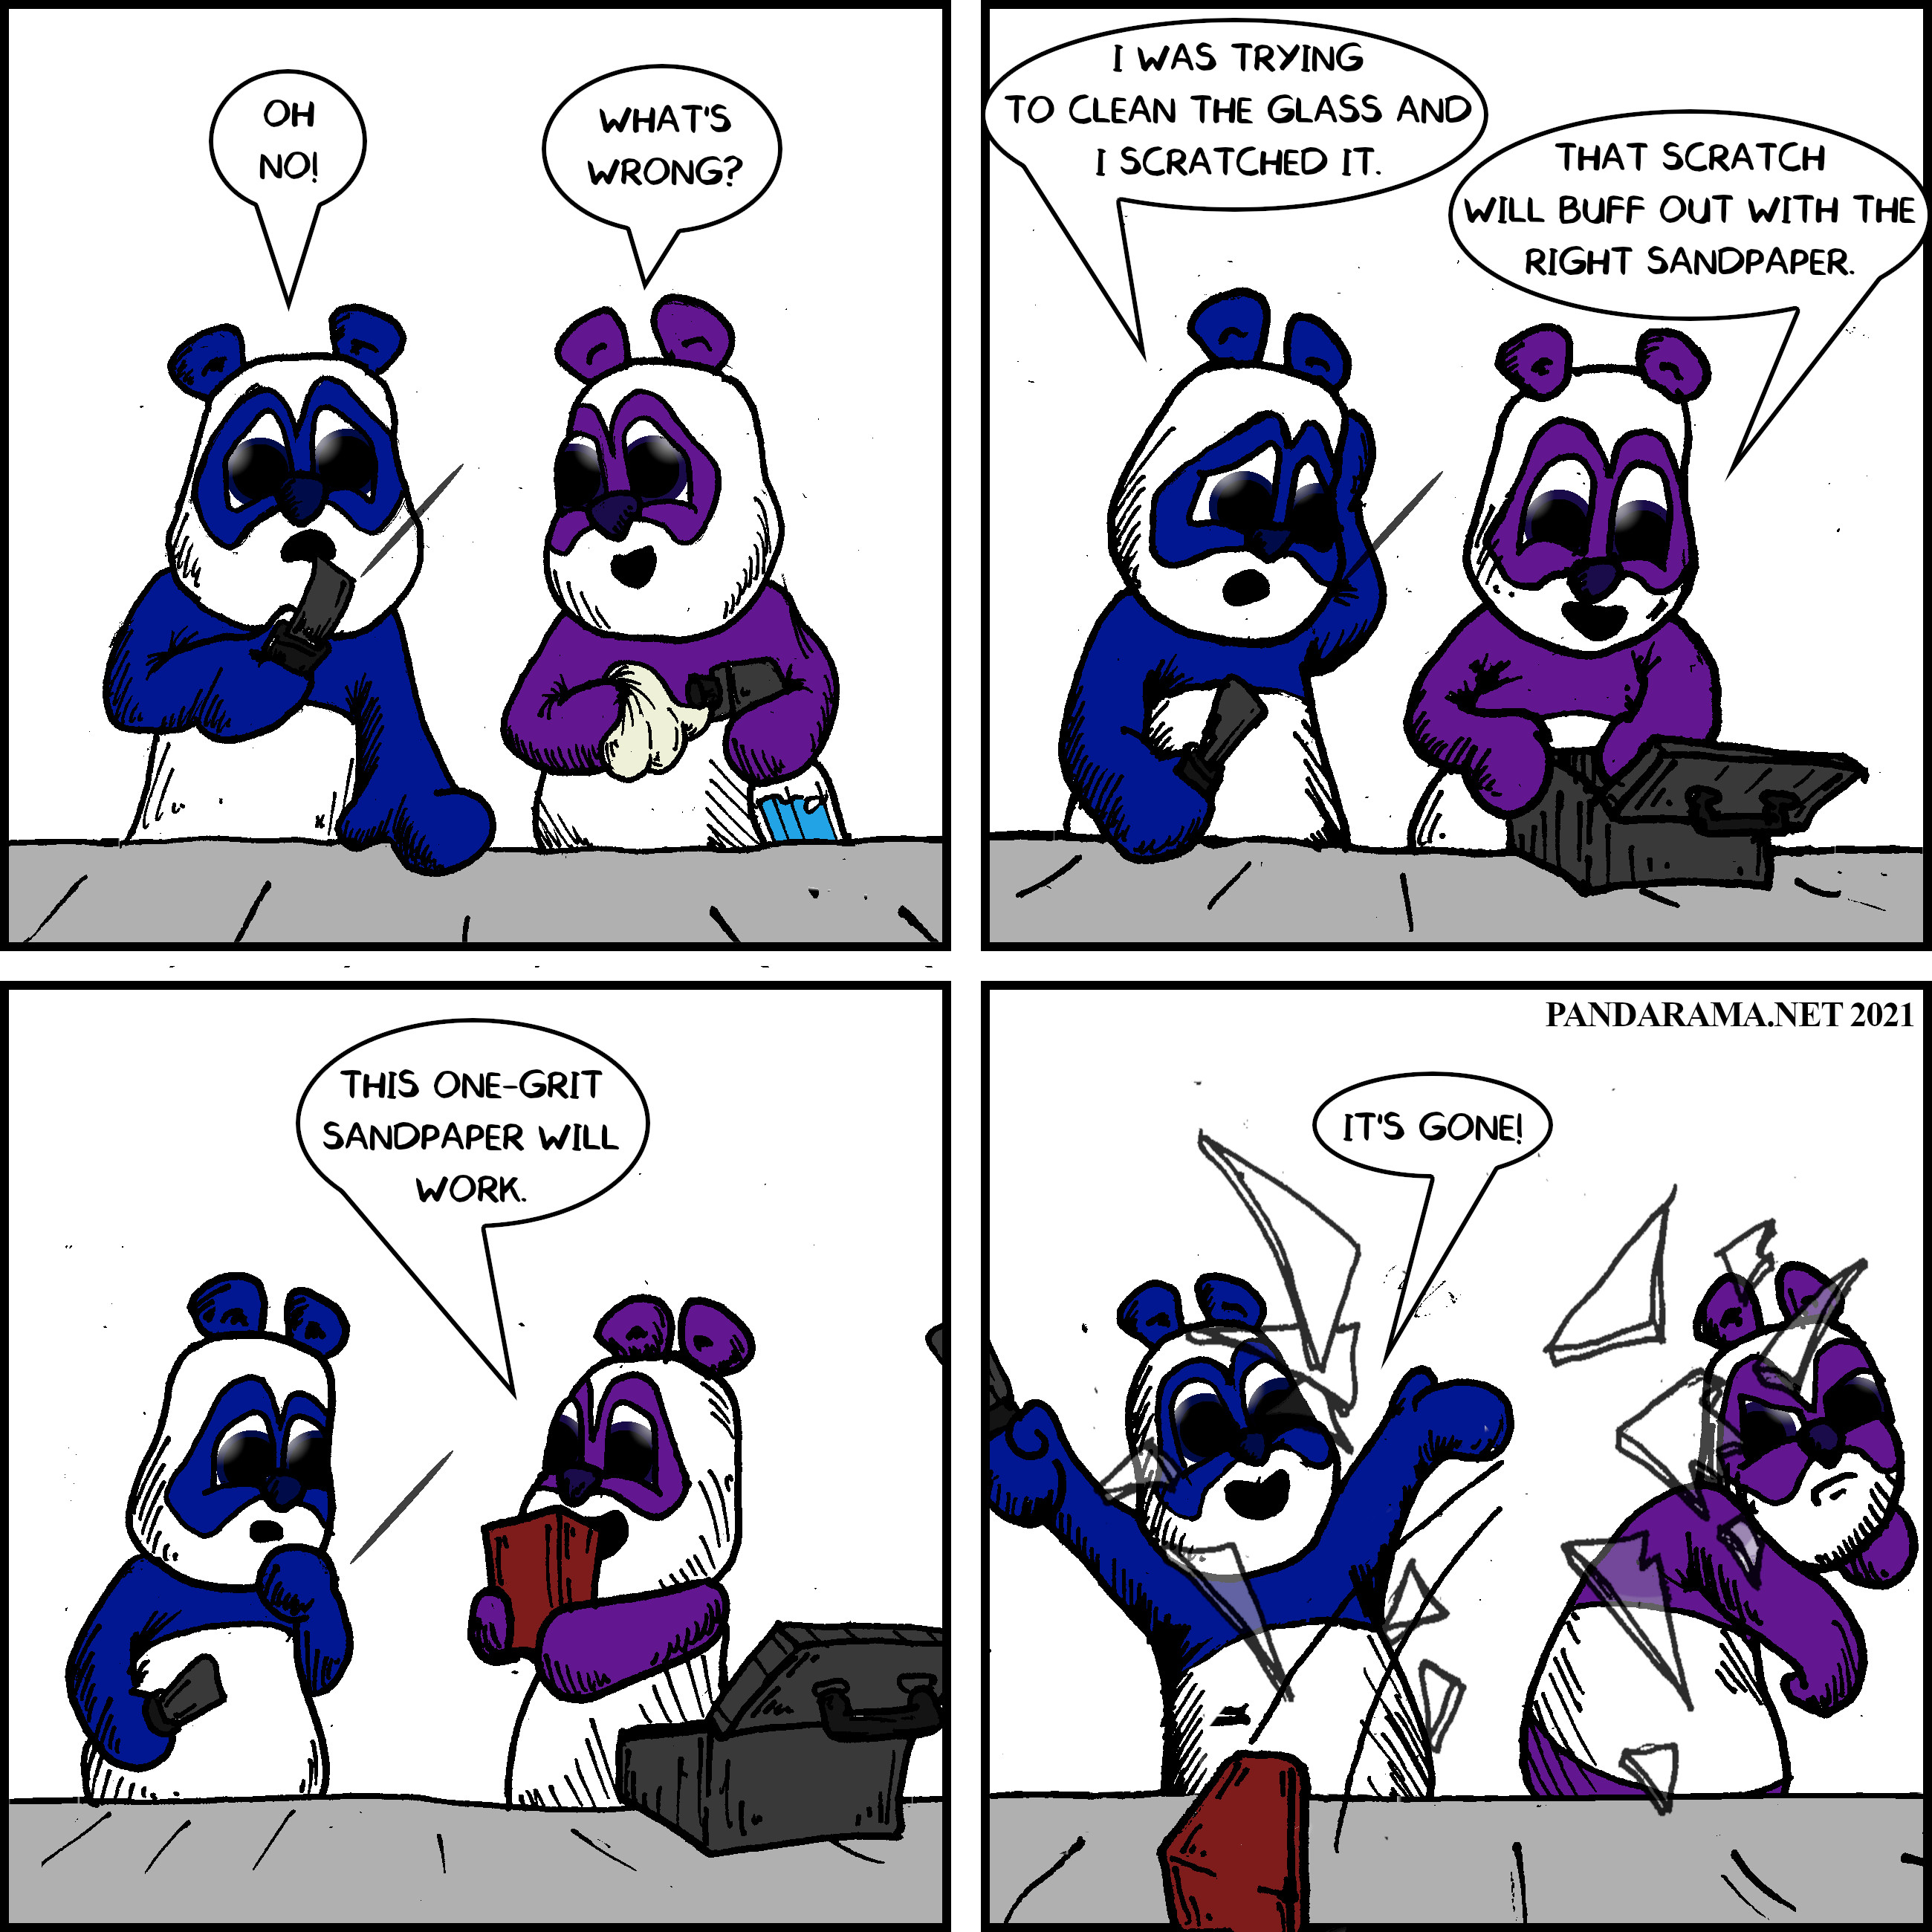 webcomic panda removes scratch from glass with one-grit sand paper, a brick.